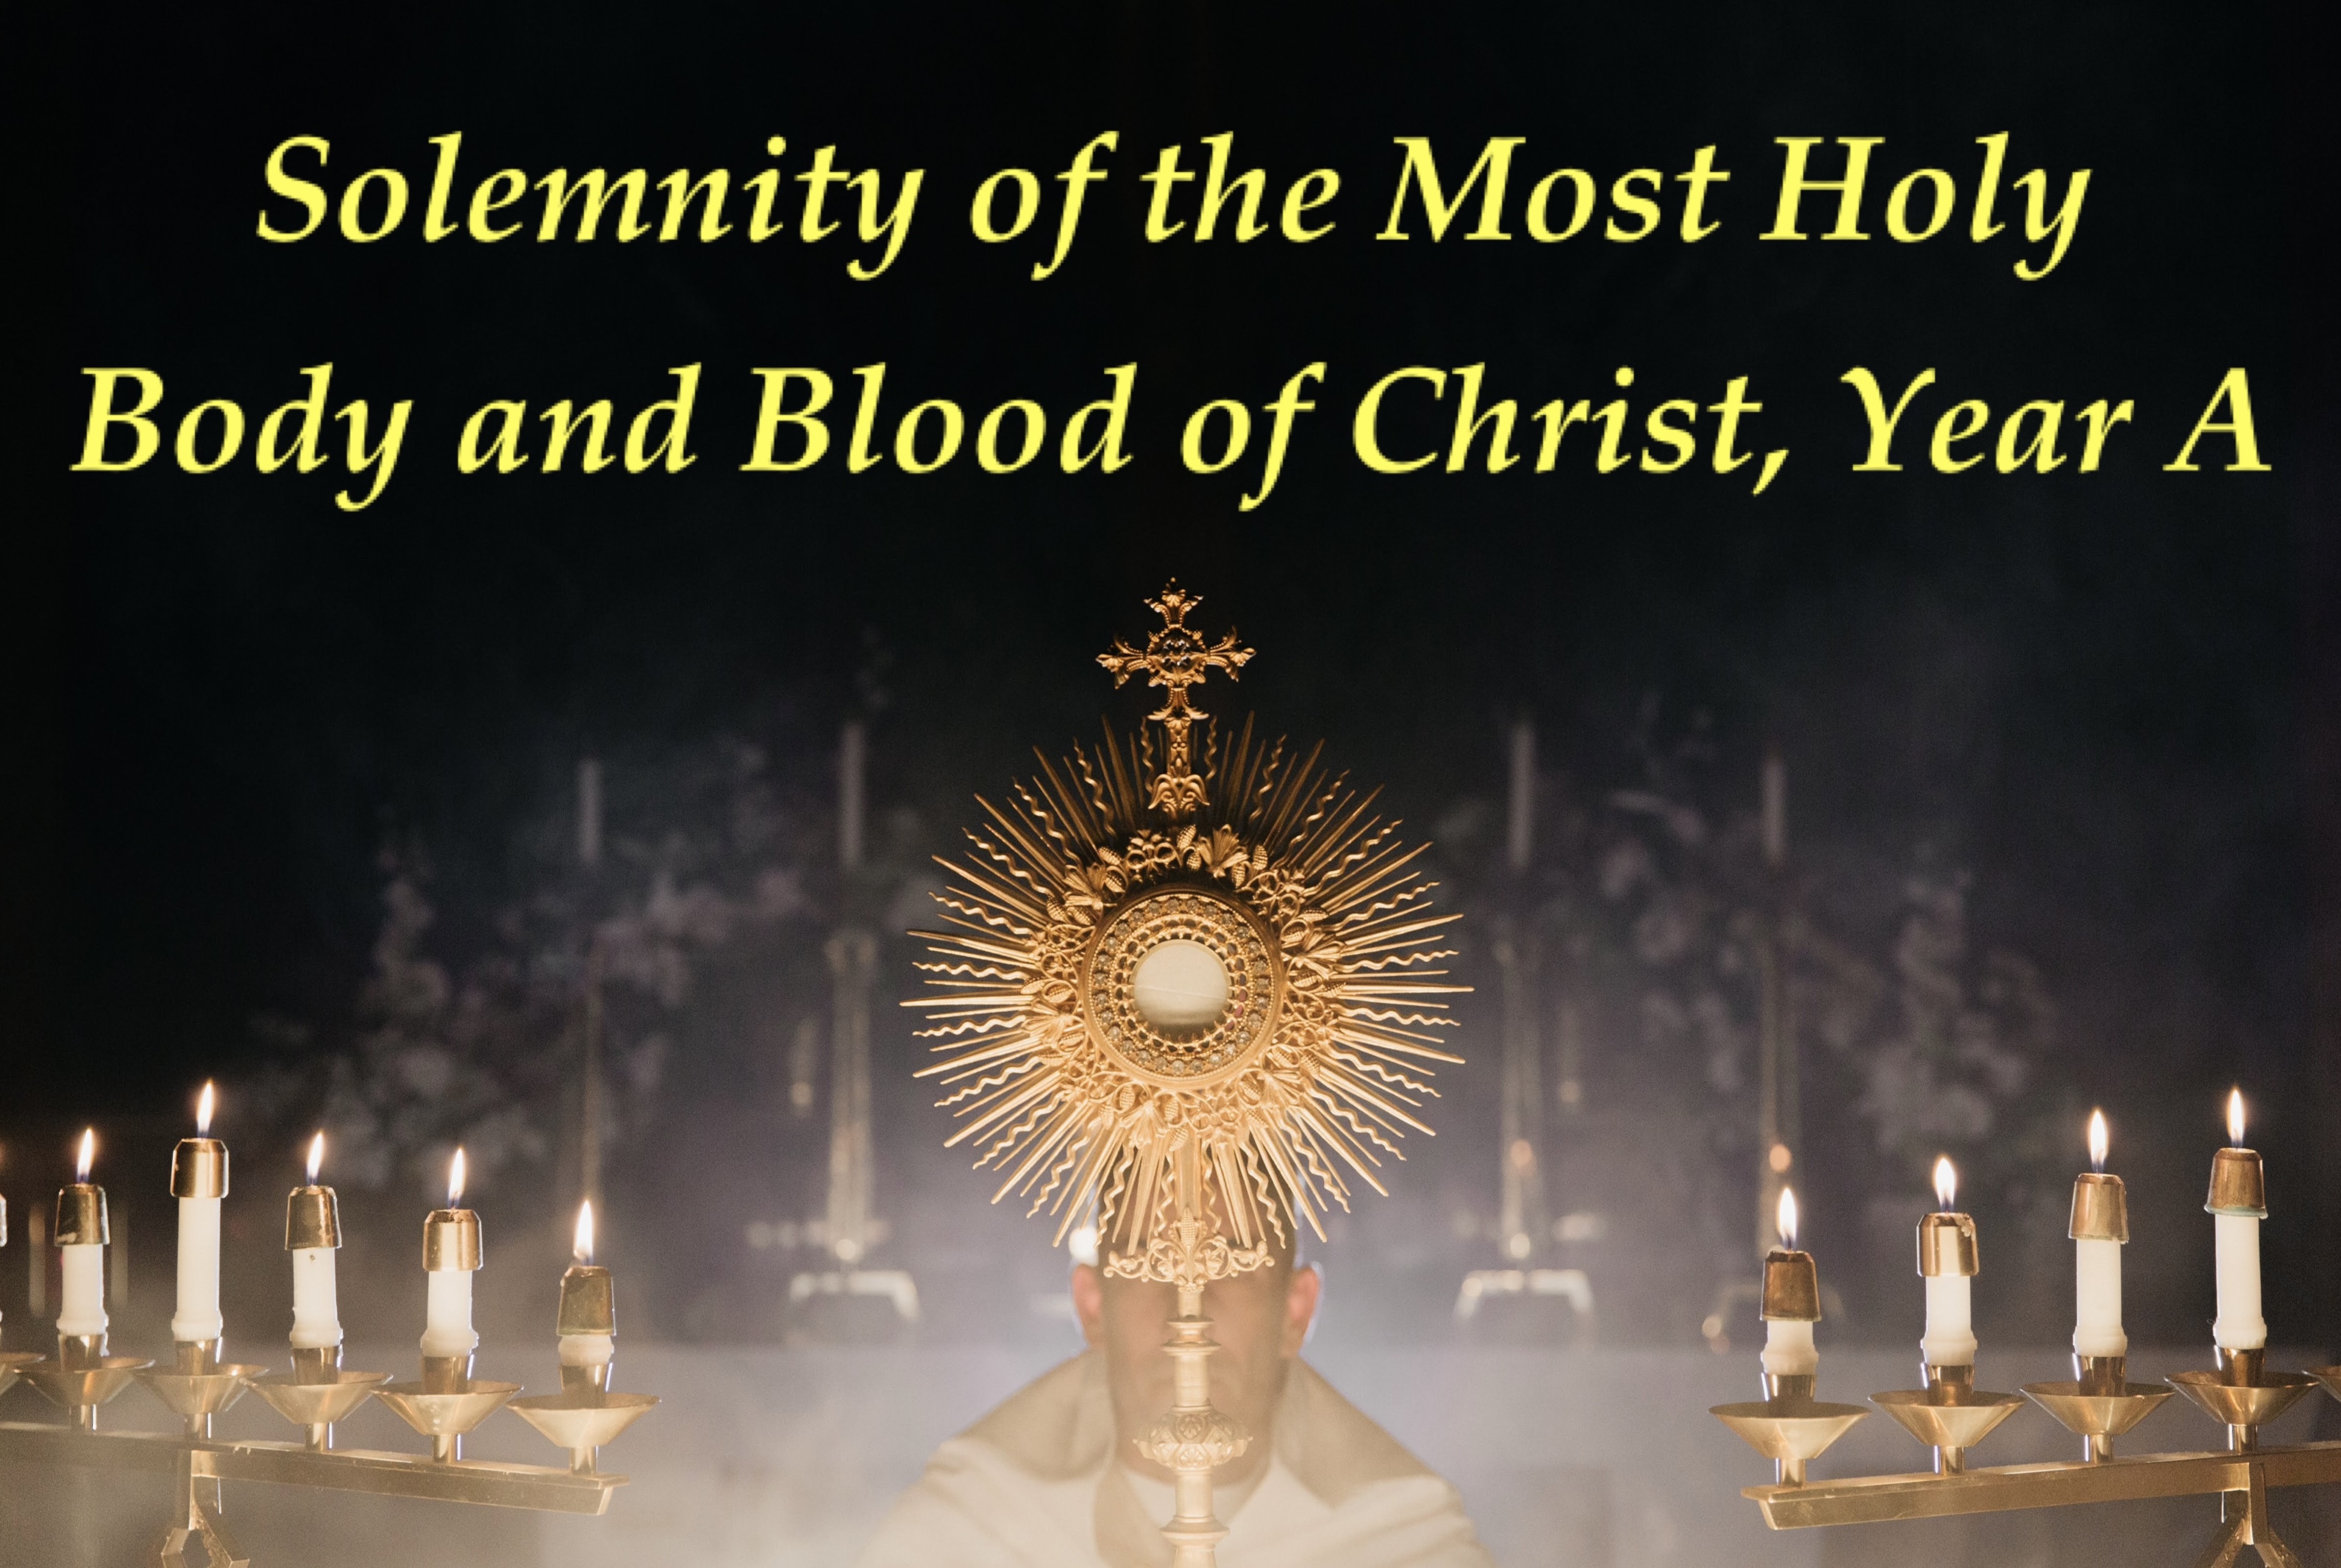 Solemnity of the Most Holy Body and Blood of Christ, Year A